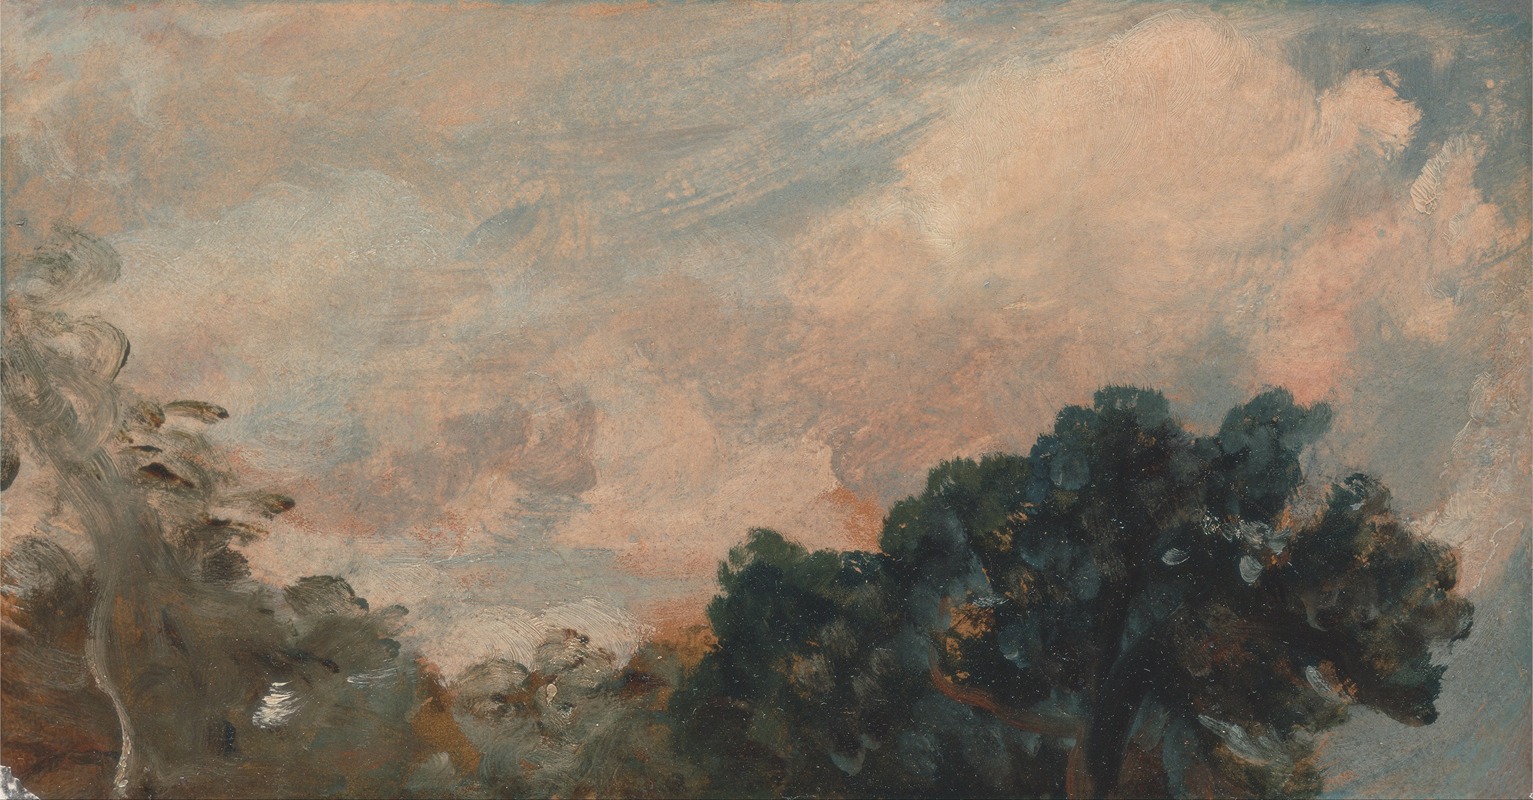 John Constable - Cloud Study with Trees